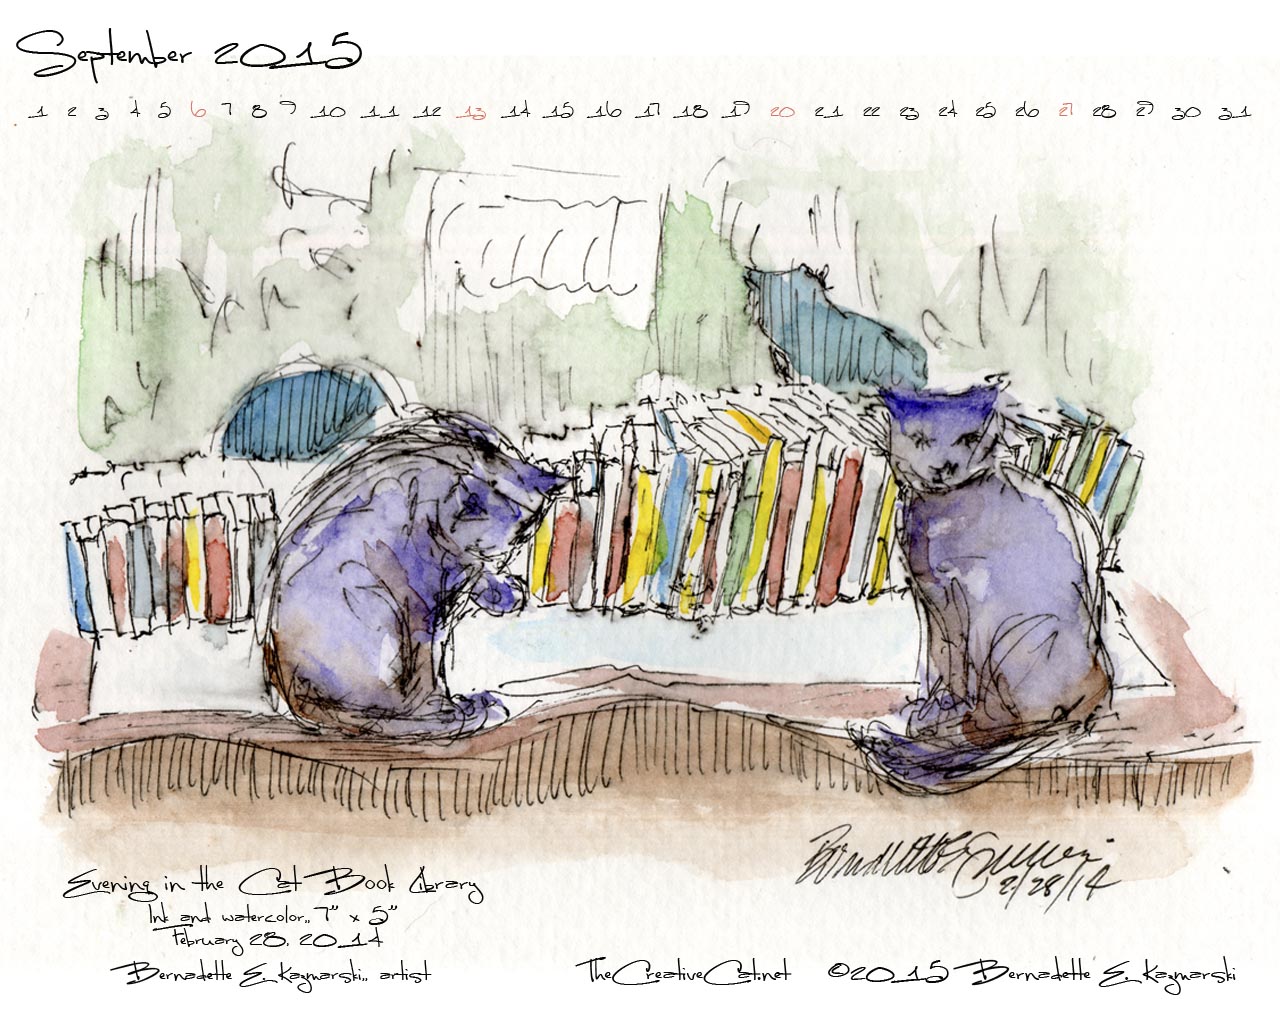 "Evening in the Cat Book Library" desktop calendar, 1280 x 1024 for square and laptop monitors.